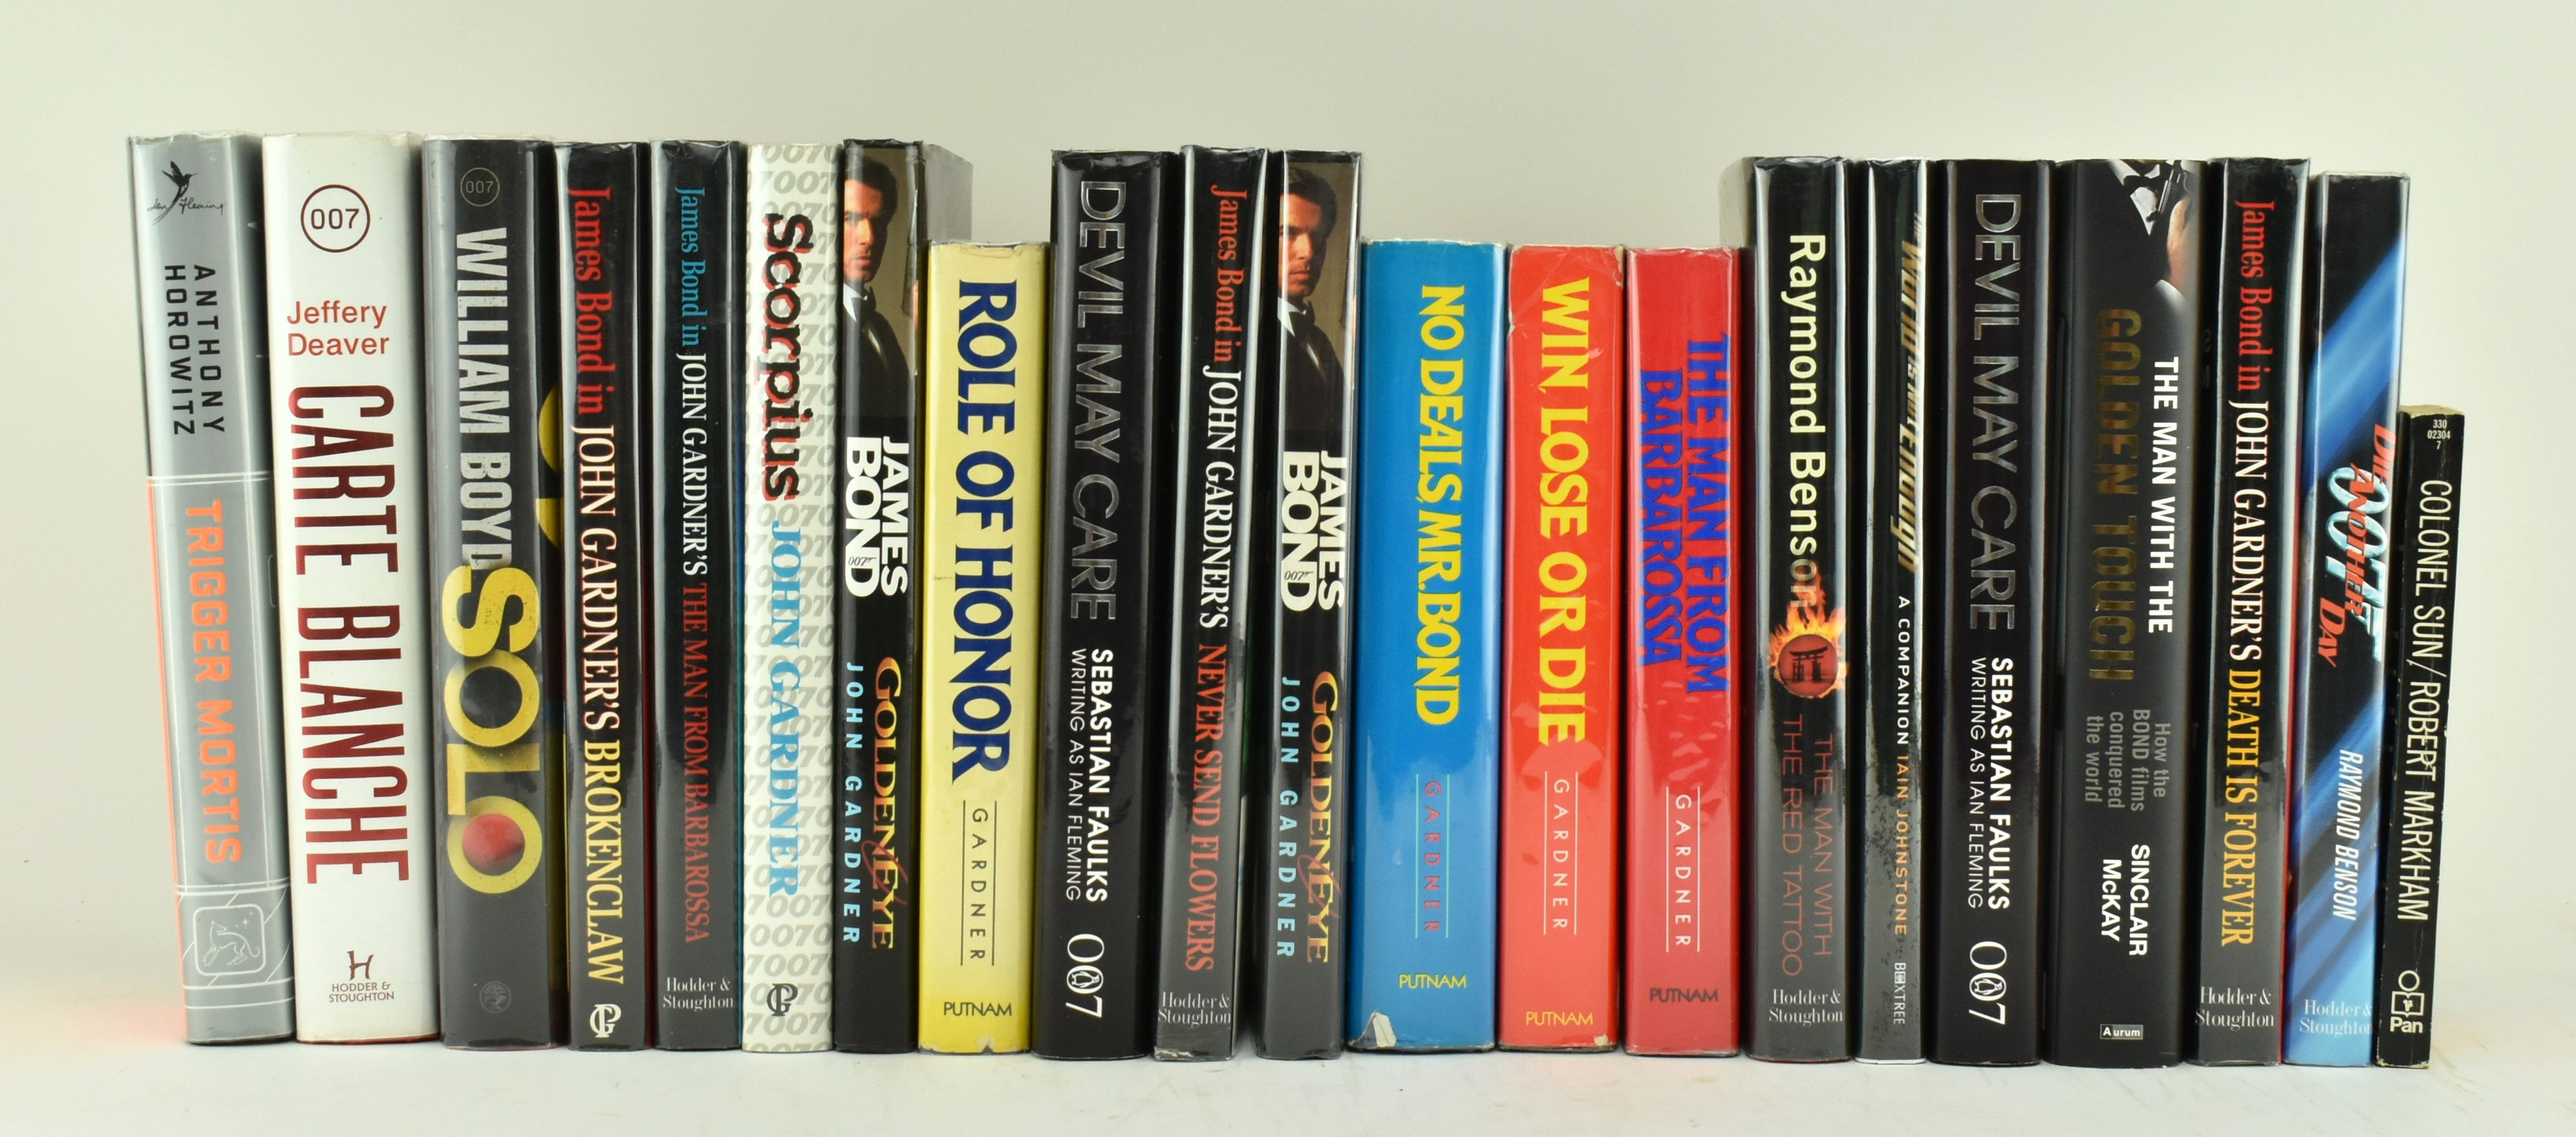 JAMES BOND NOVELS AFTER IAN FLEMING. COLLECTION OF 20 BOOKS